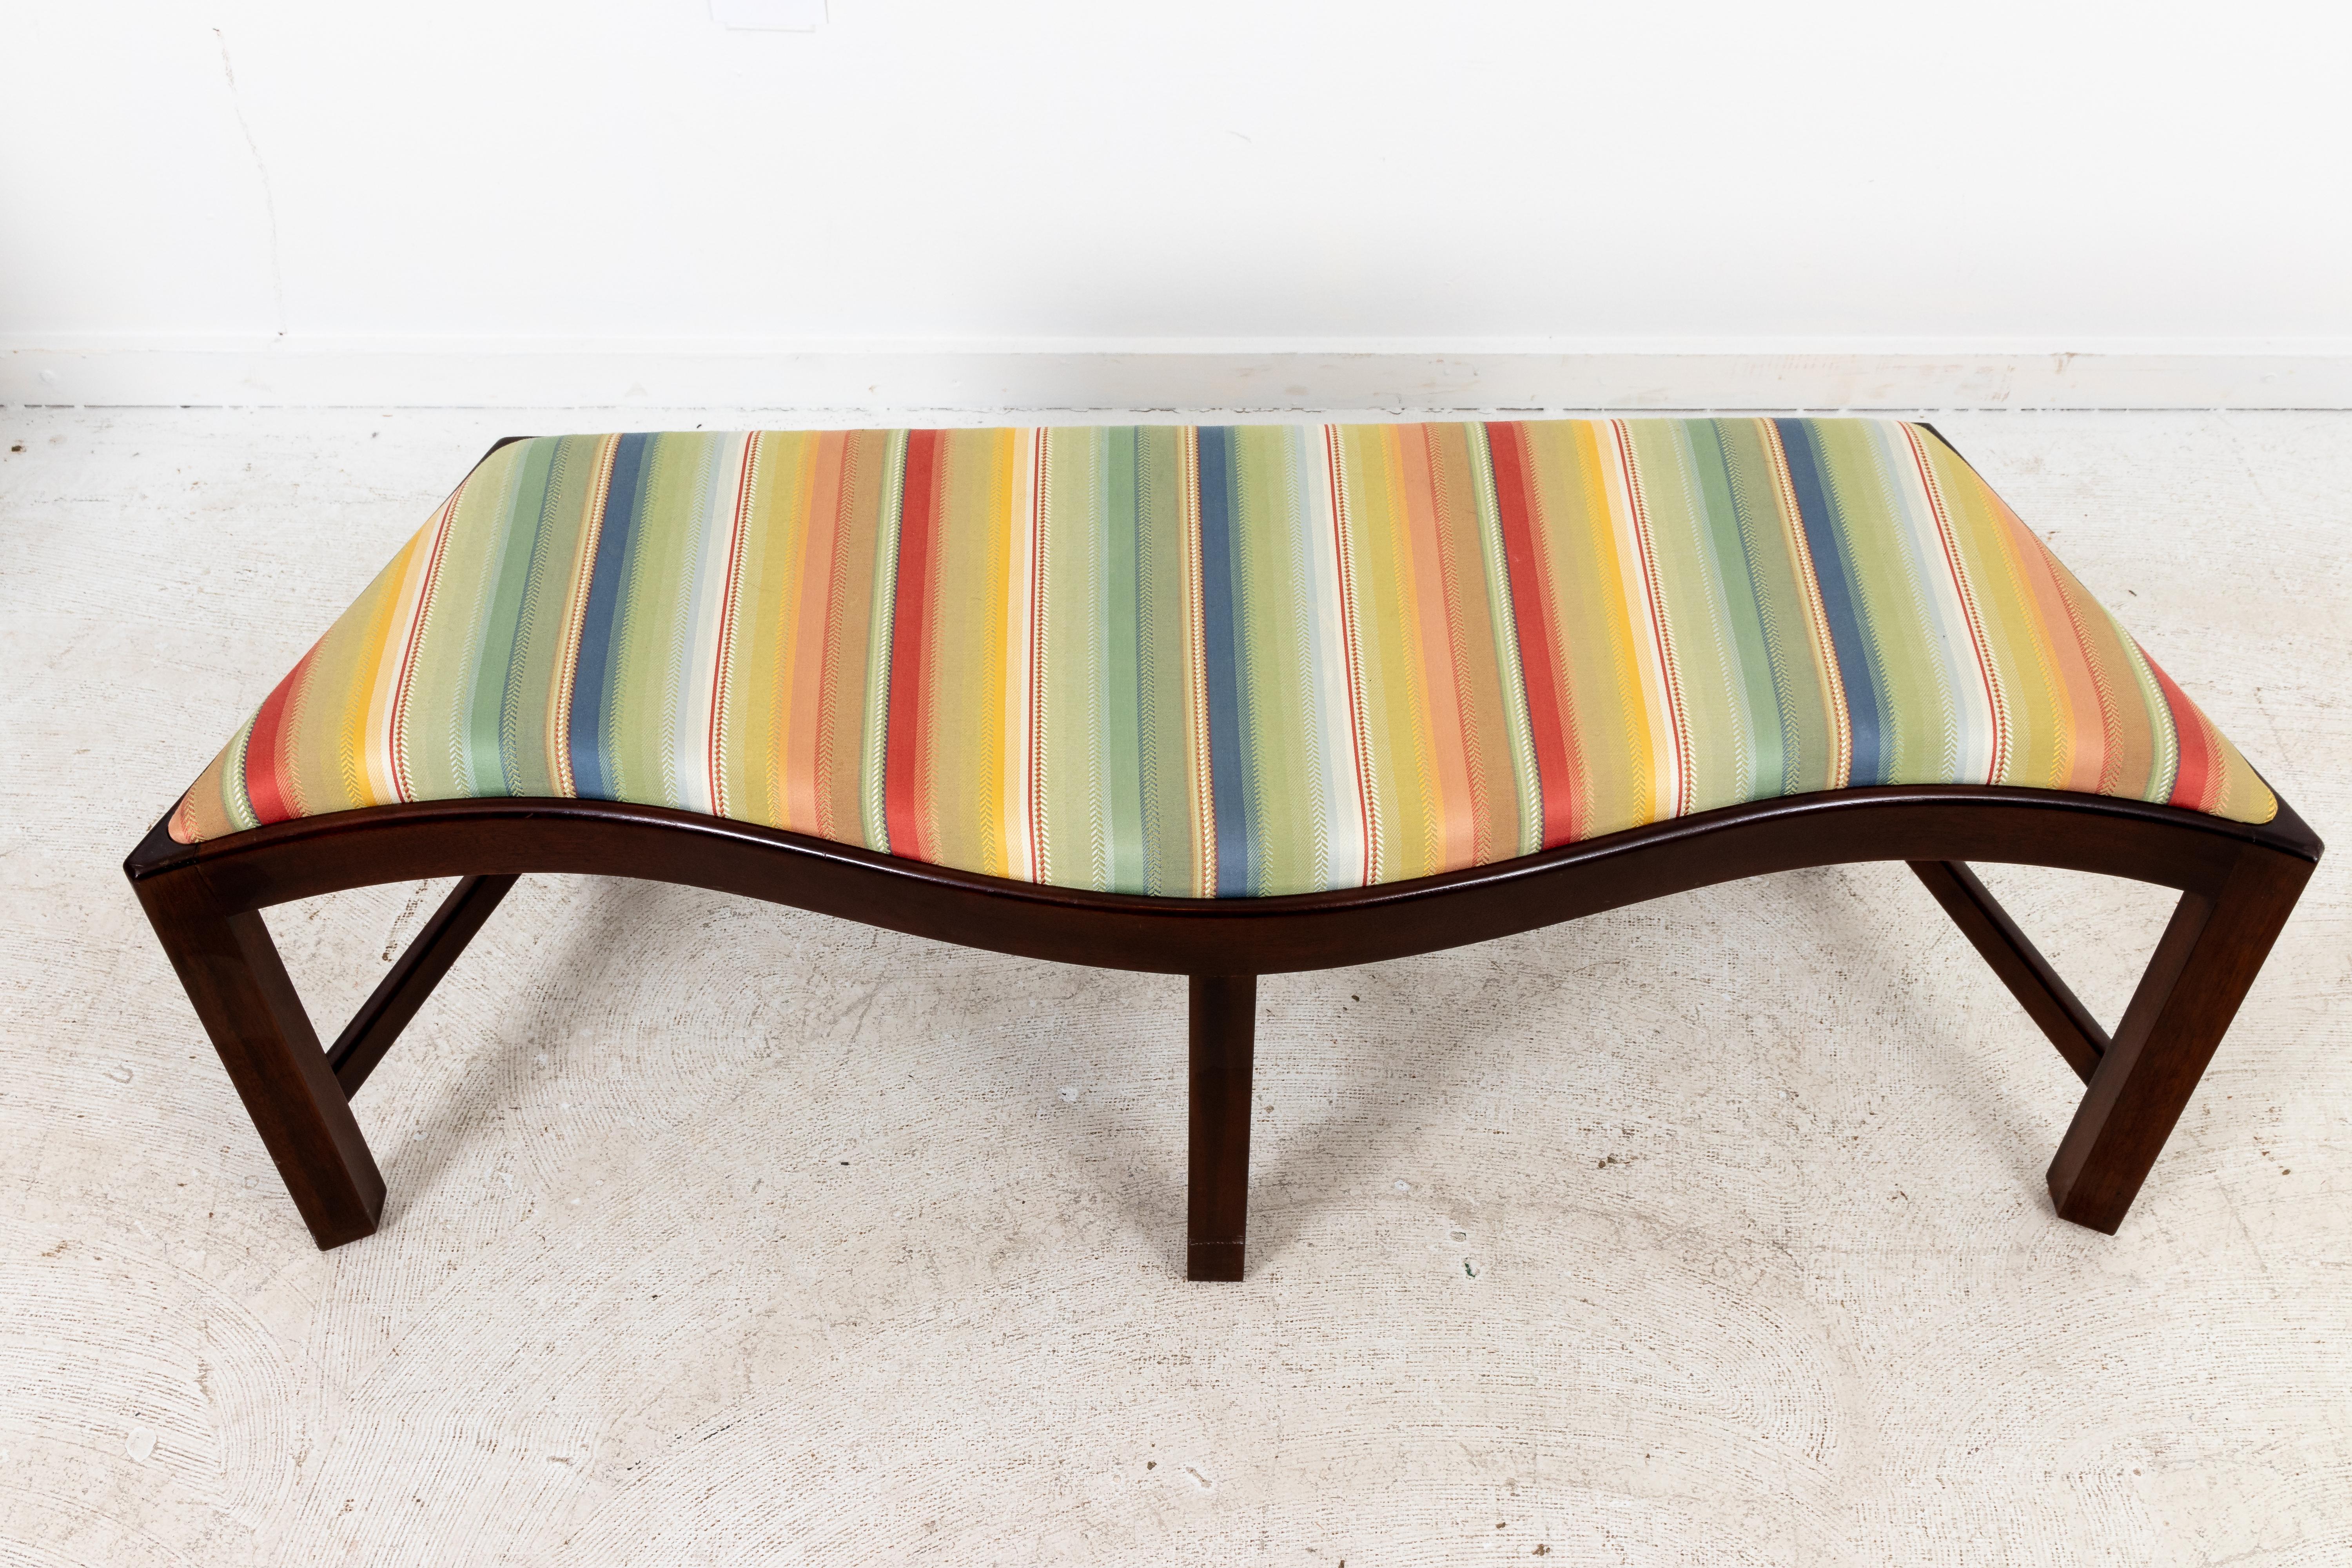 Upholstered window bench with angled sides and curvy front. In clean striped upholstery.
Measures: 48